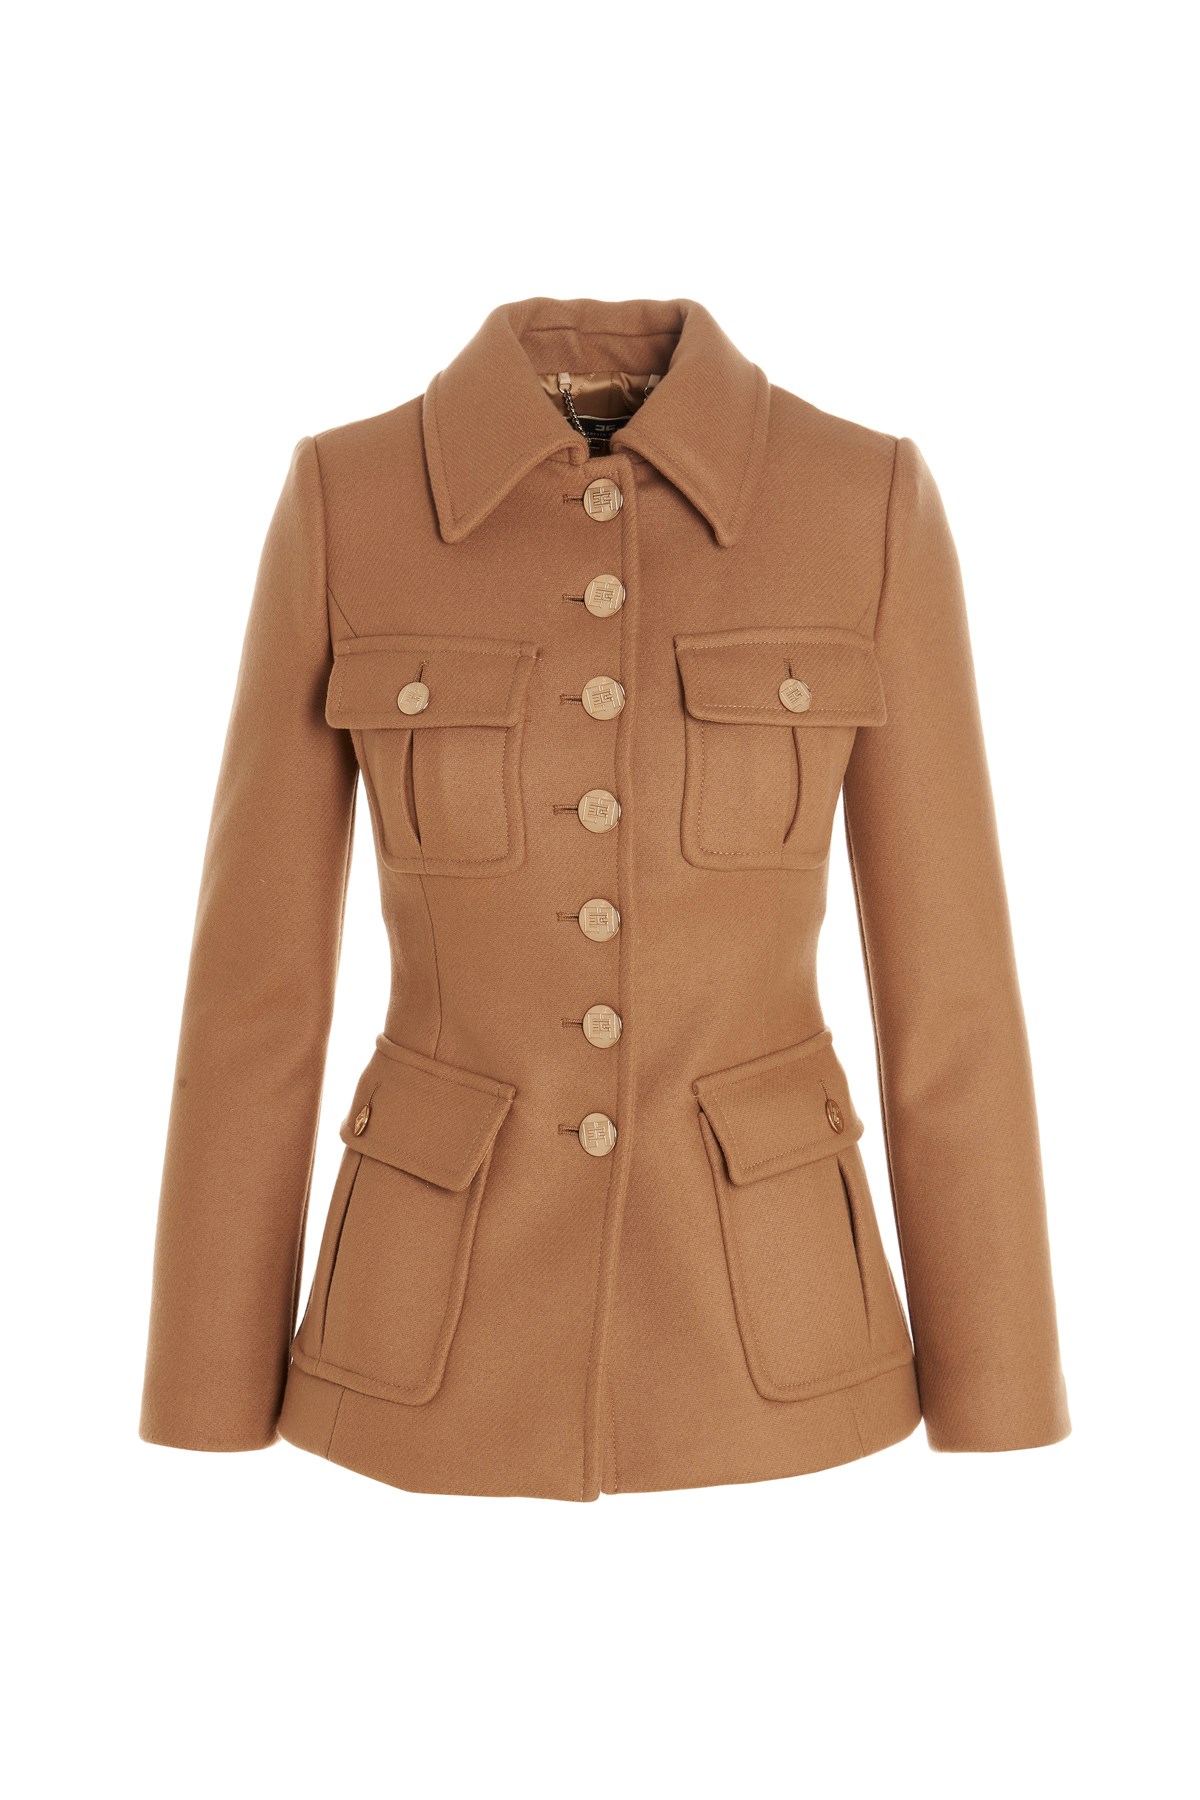 ELISABETTA FRANCHI Peacoat Coat With Buttons